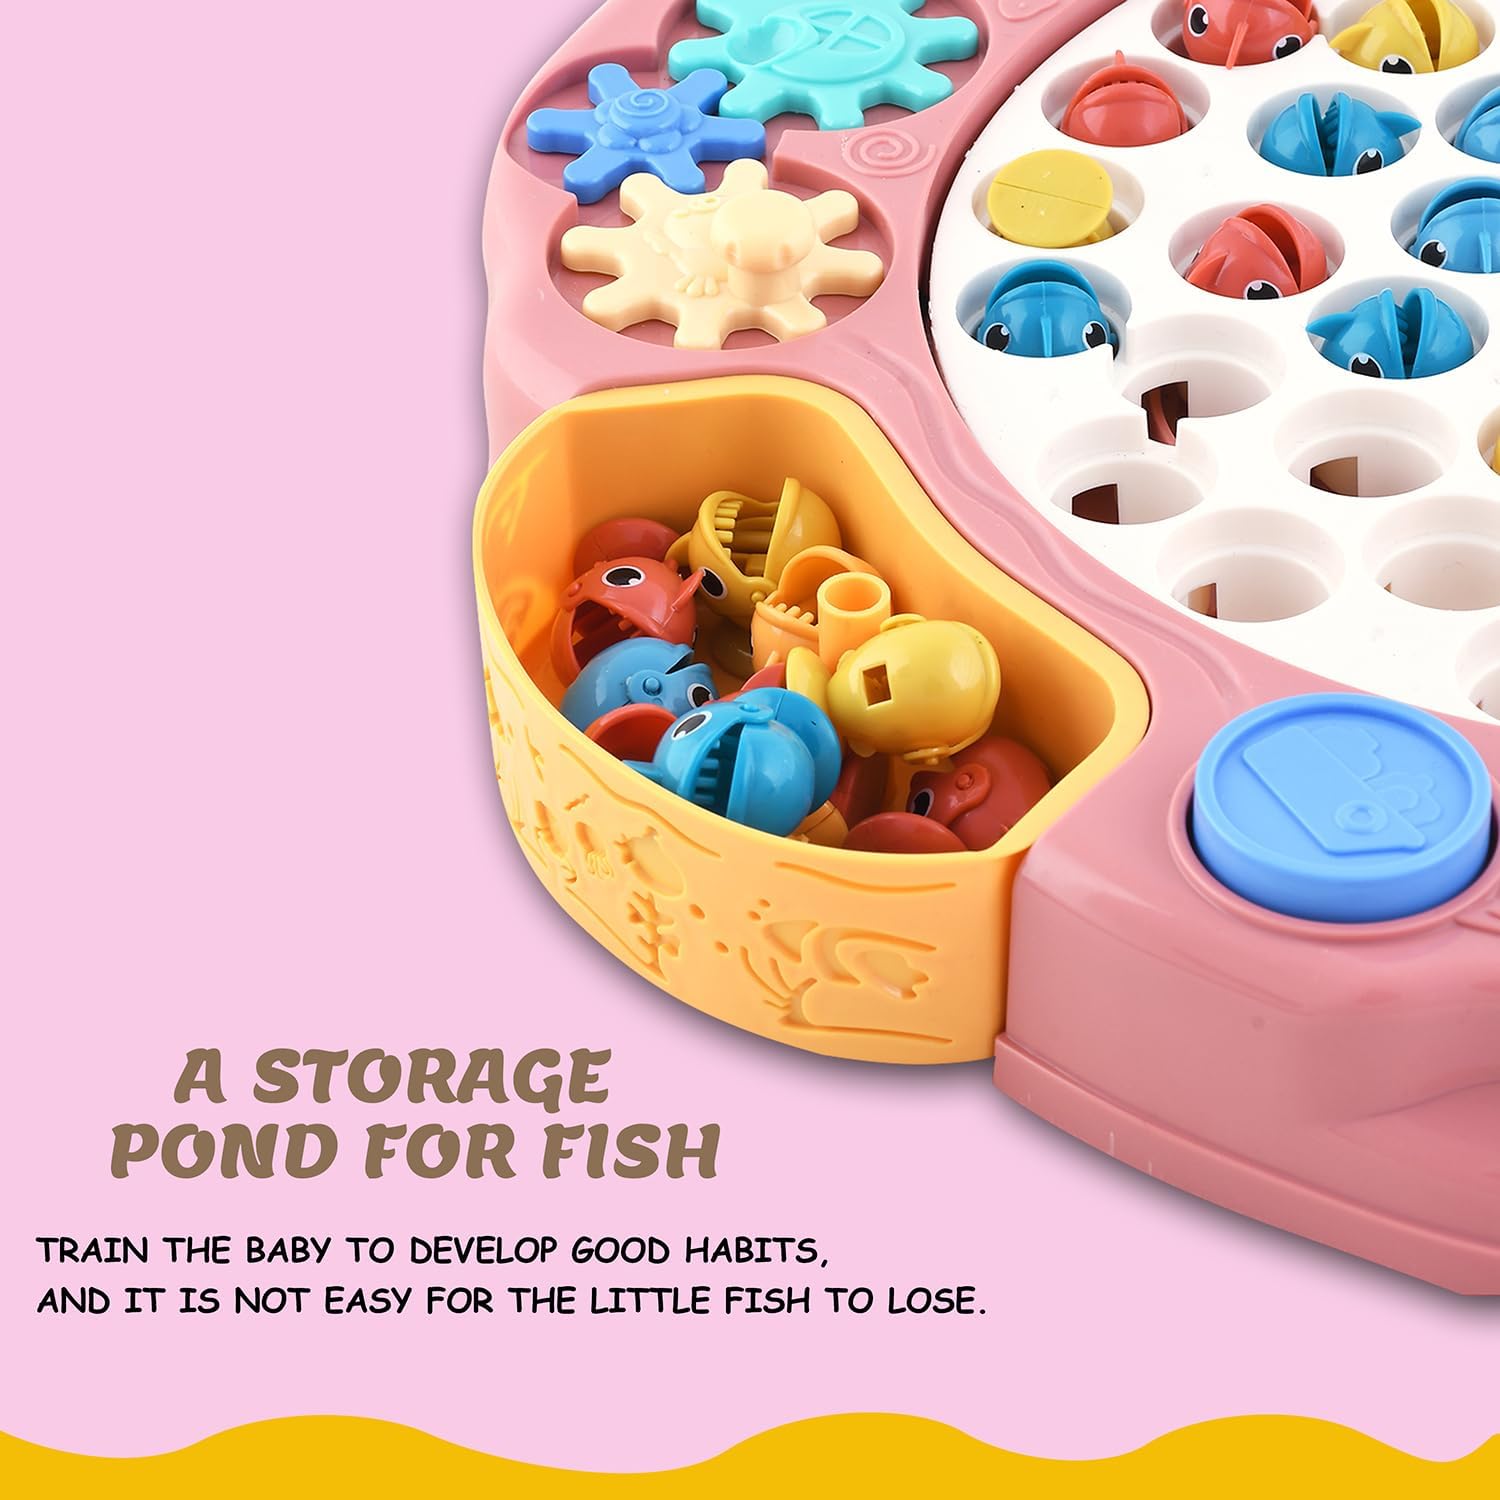 Braintastic Motorized Musical Rotating Fun Fishing Game Toy with 45 Colorful Fish and 2 Fishing Poles Inbuilt Musical Piano for Kids